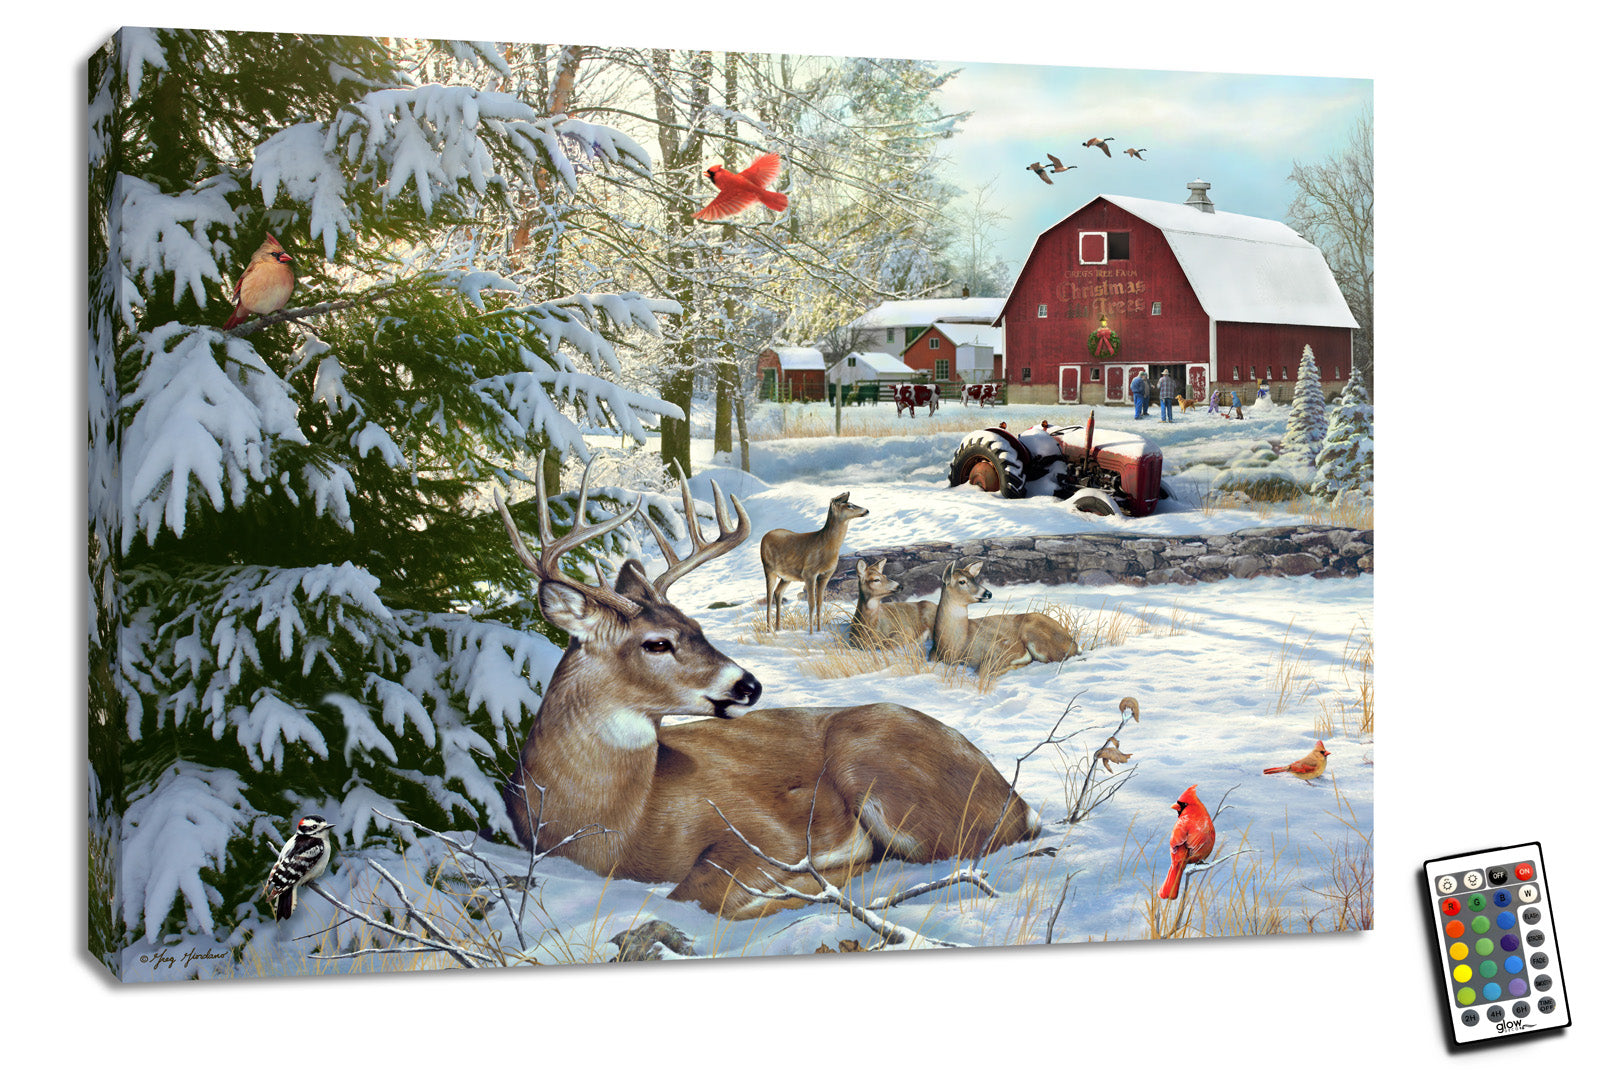 this stunning piece features a picturesque scene of a family of deer resting near a snow-covered farm. In the background, a family is gathered by a charming red barn, adding warmth and familiarity to the scene.